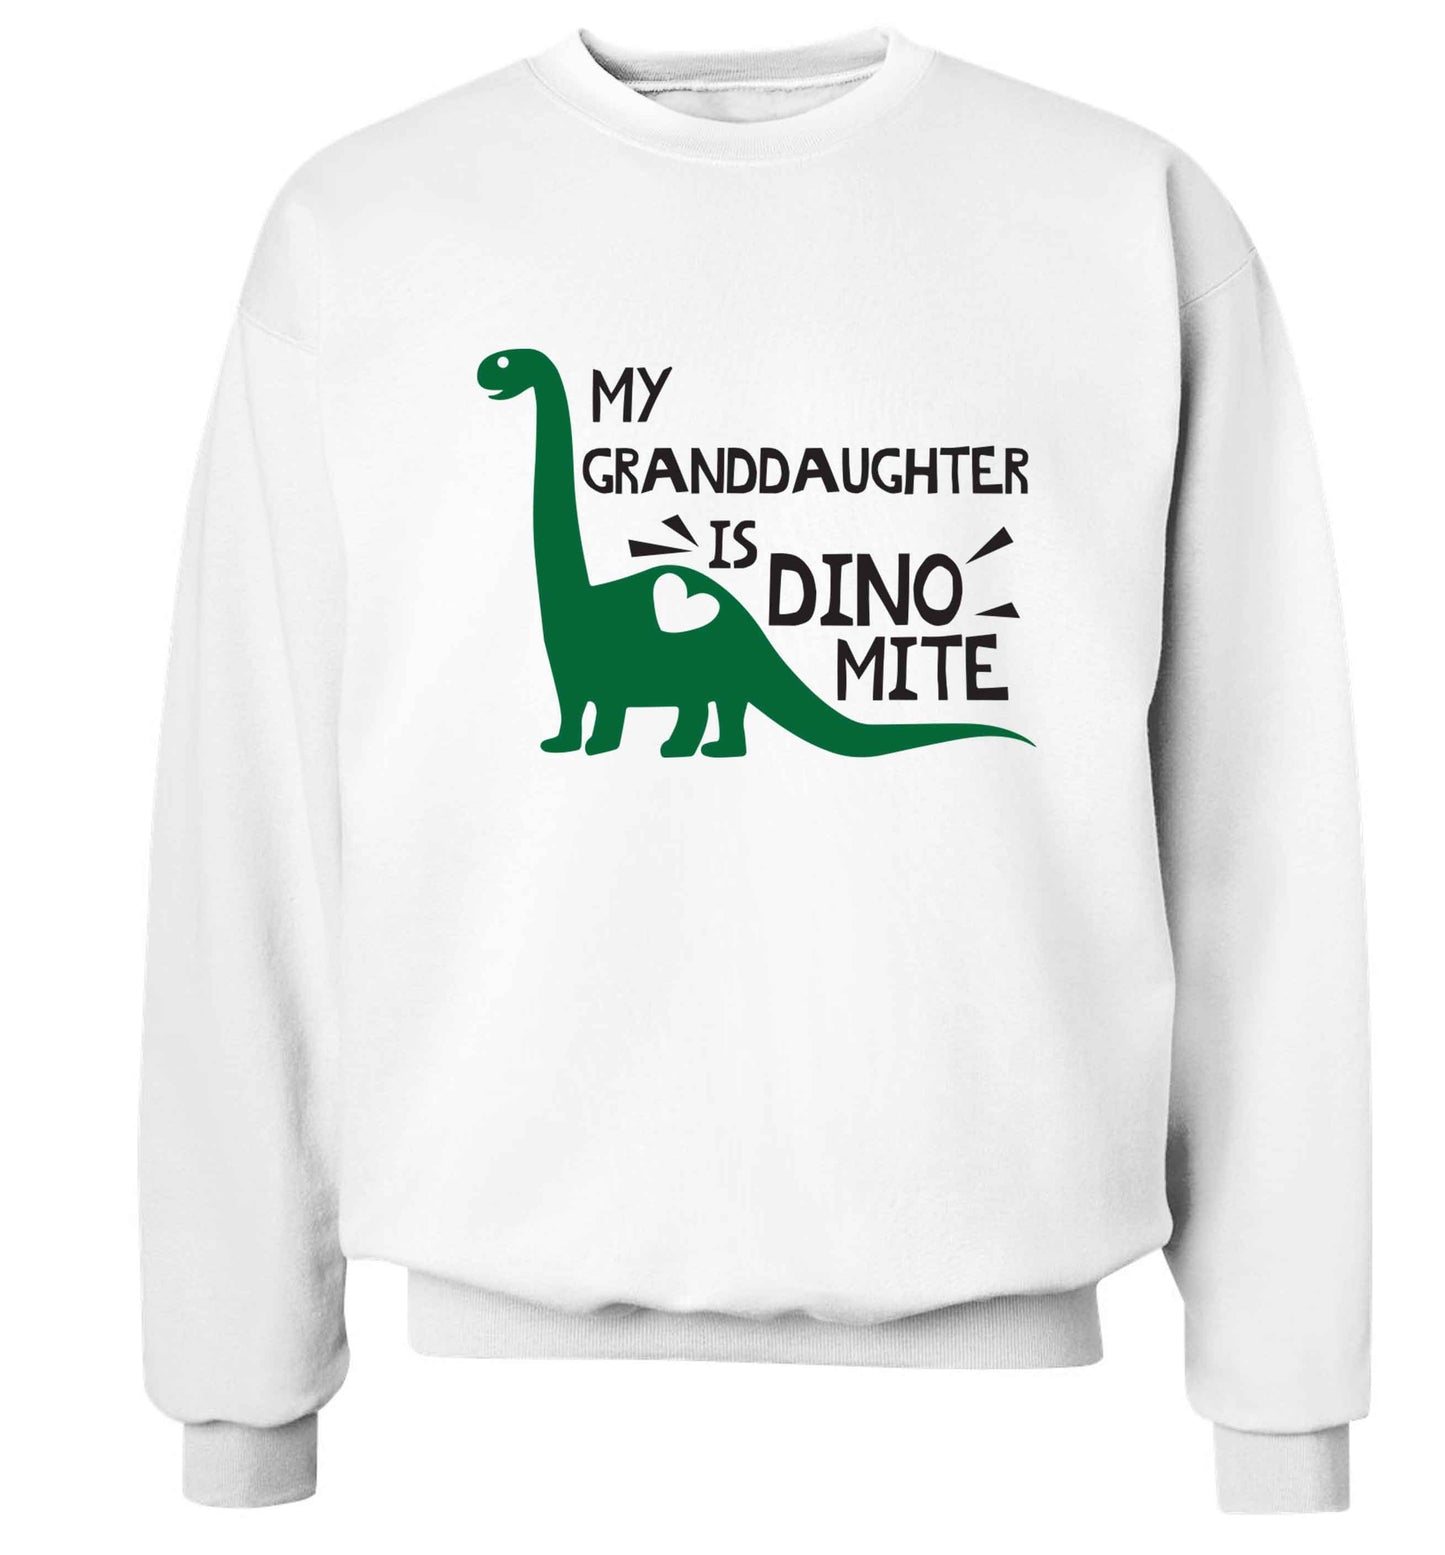 My granddaughter is dinomite! Adult's unisex white Sweater 2XL